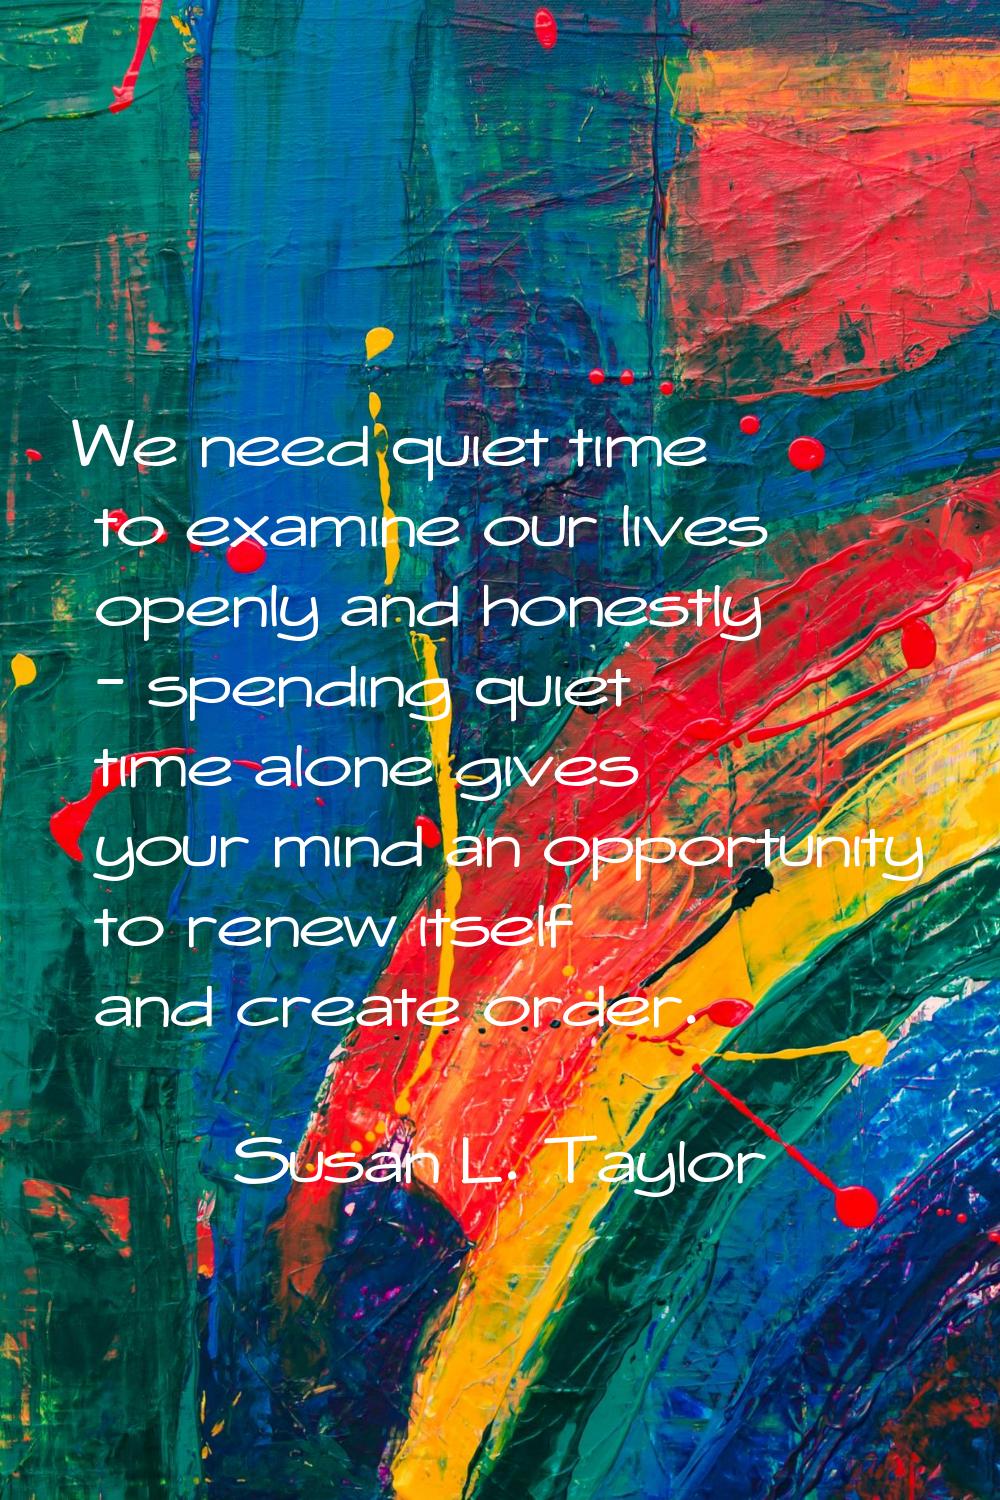 We need quiet time to examine our lives openly and honestly - spending quiet time alone gives your 